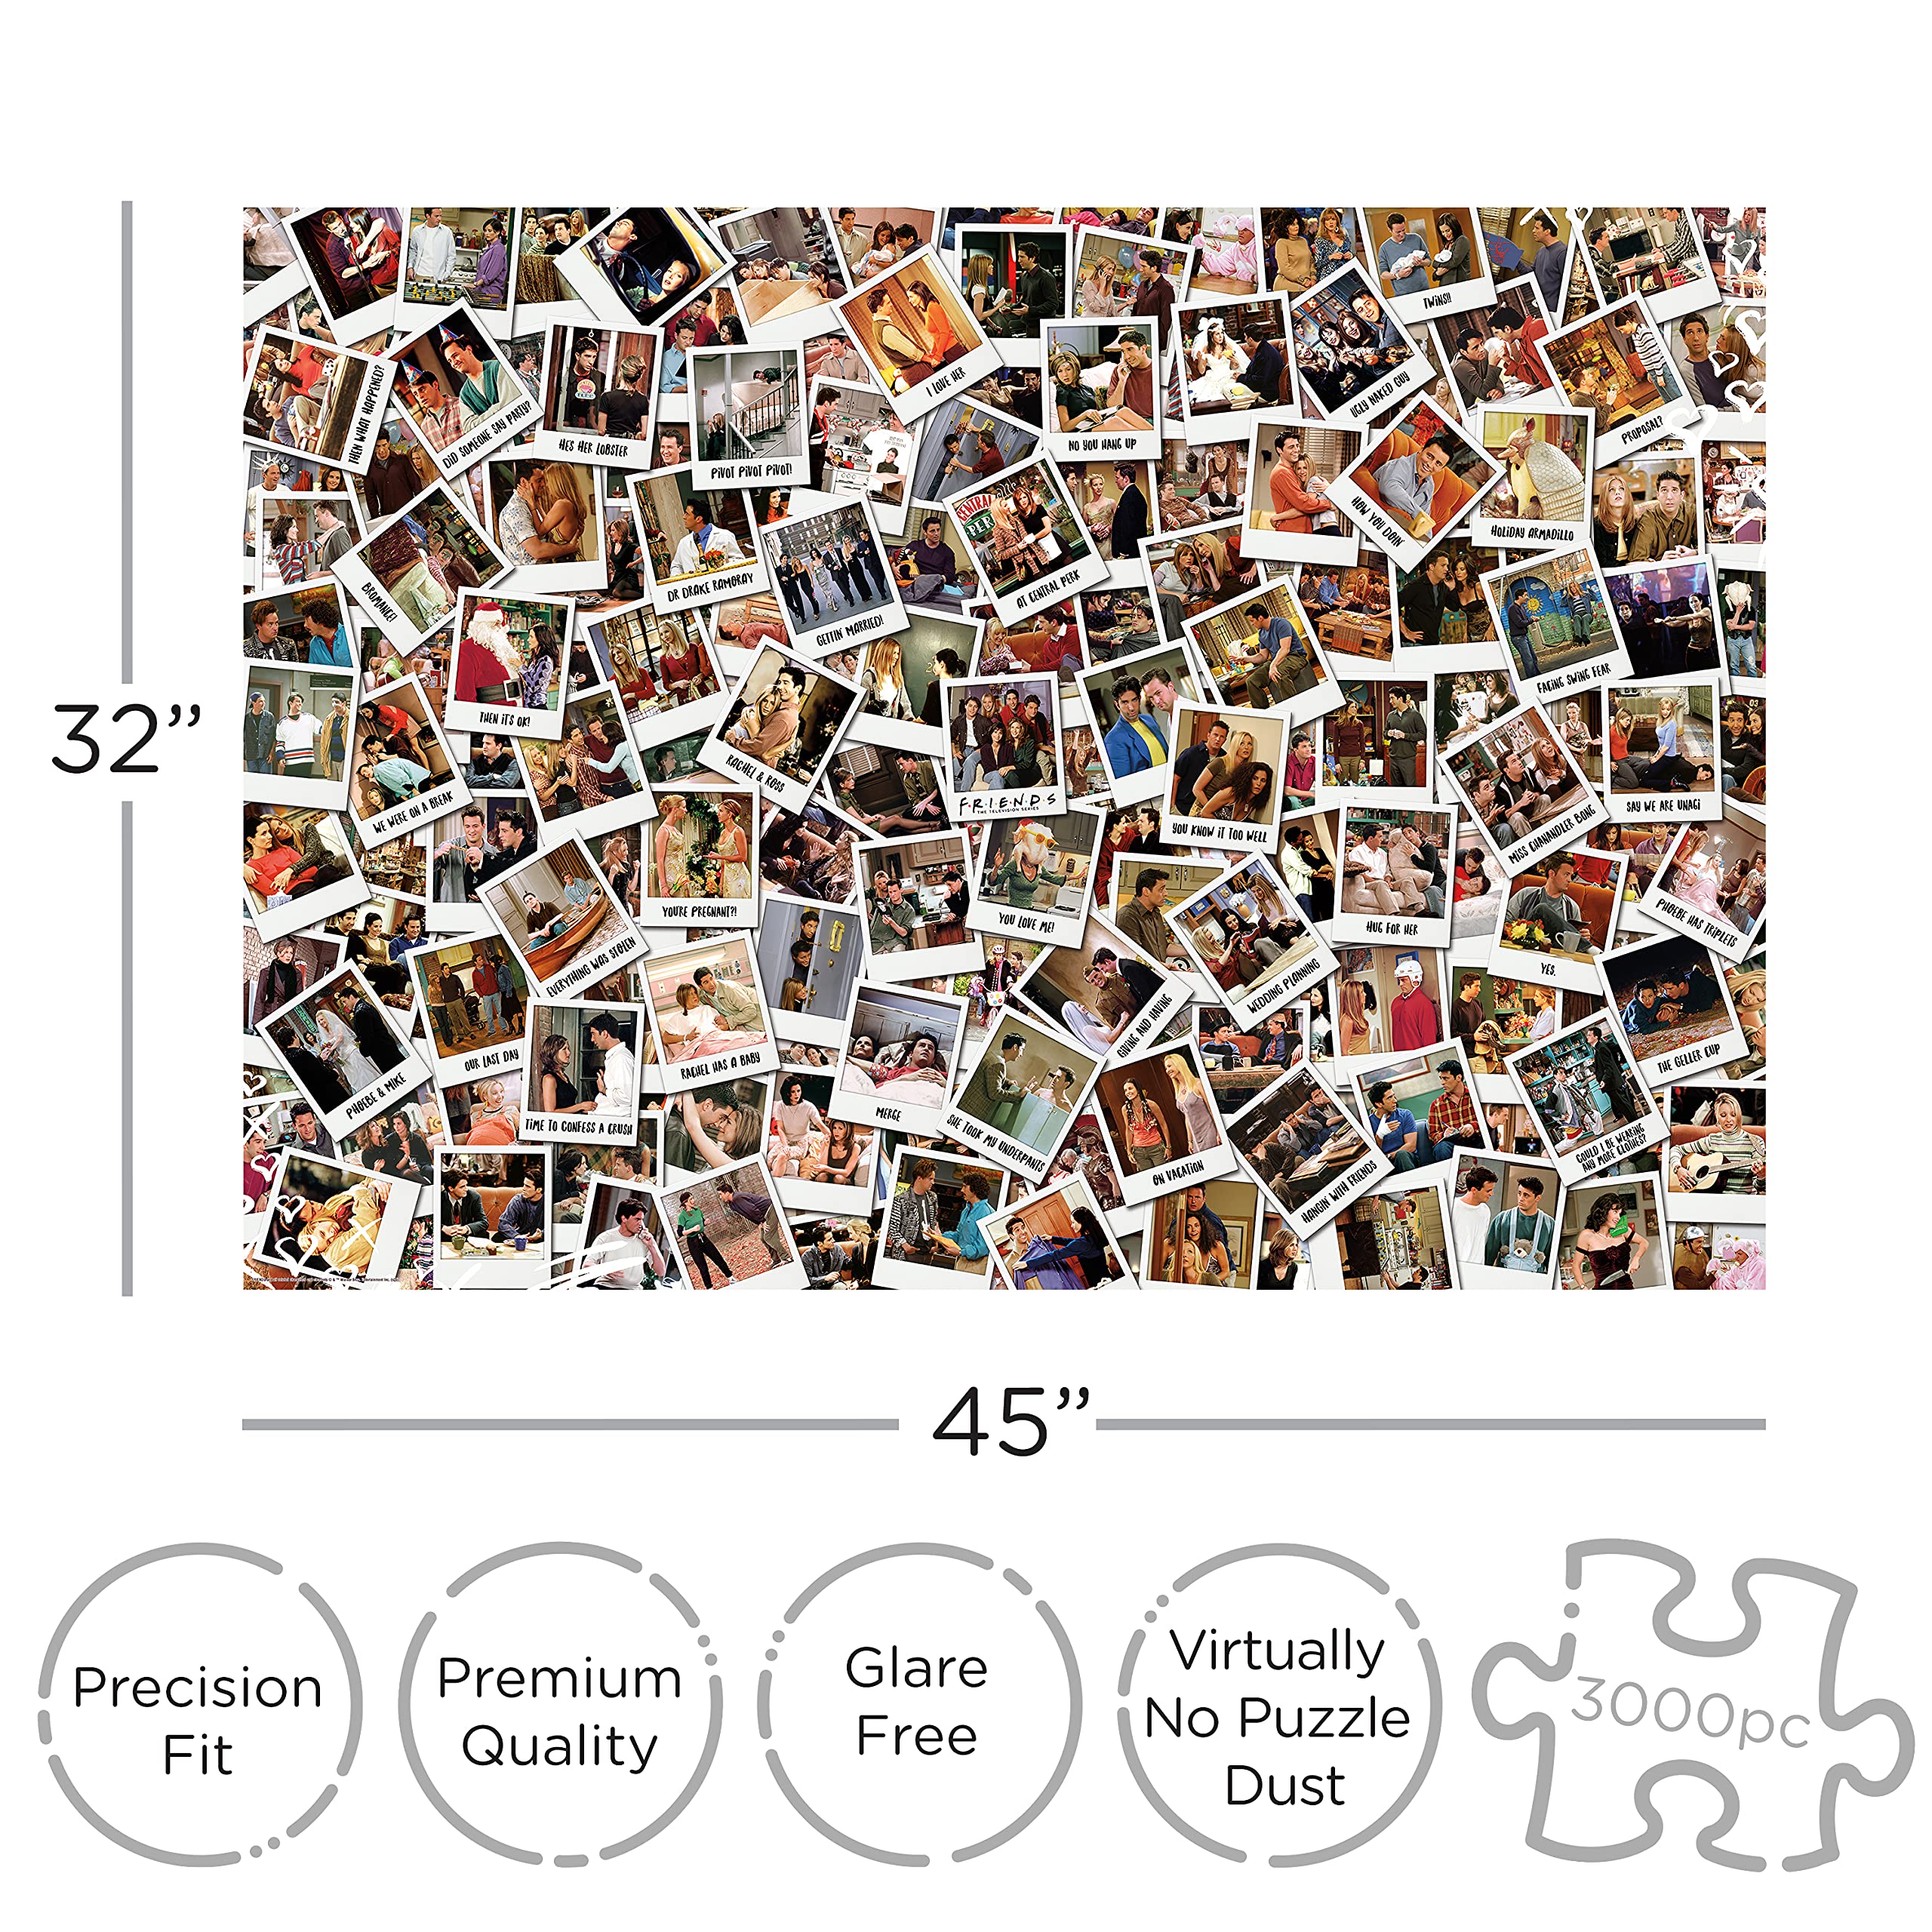 Aquarius Friends Puzzle (3000 Piece Jigsaw Puzzle) - Officially Licensed Friends TV Show Merchandise & Collectibles - Glare Free - Precision Fit - 32 x 45 Inches